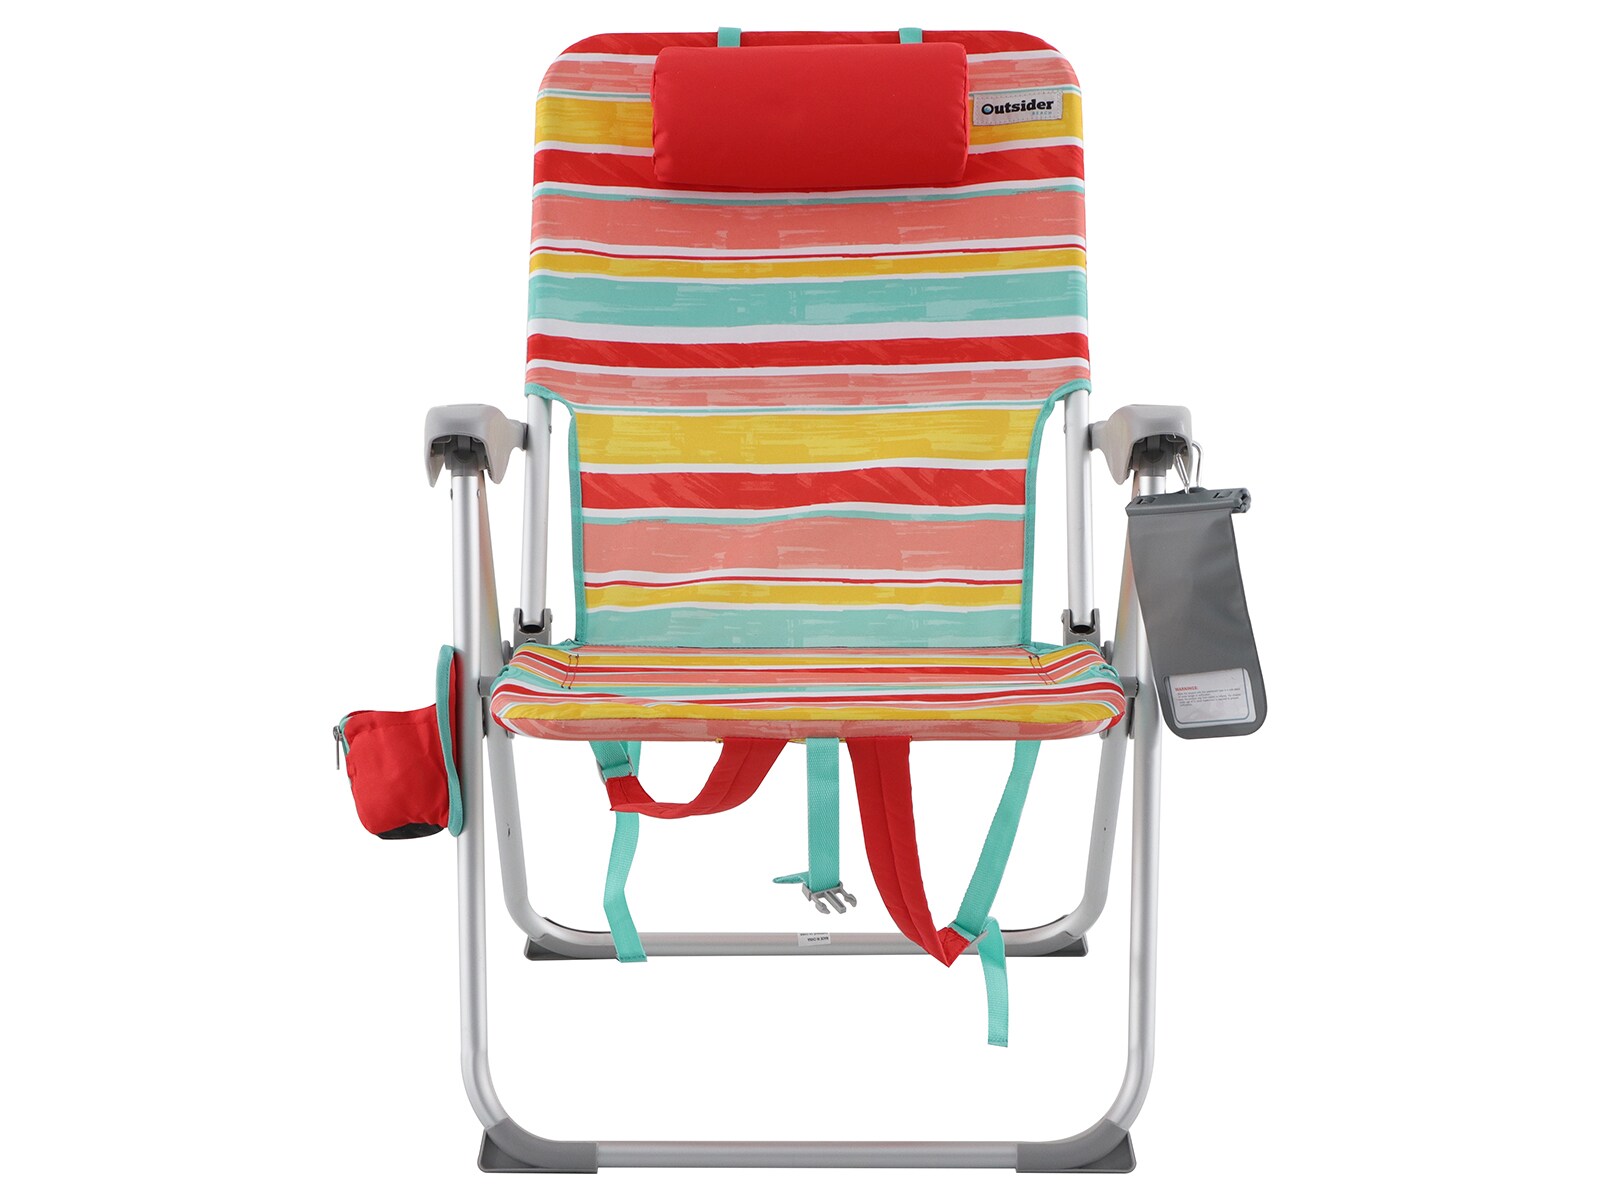 Details about   Metal Garden Armchair Folding Low Portable Camping Beach Chair Red Stripe x4 